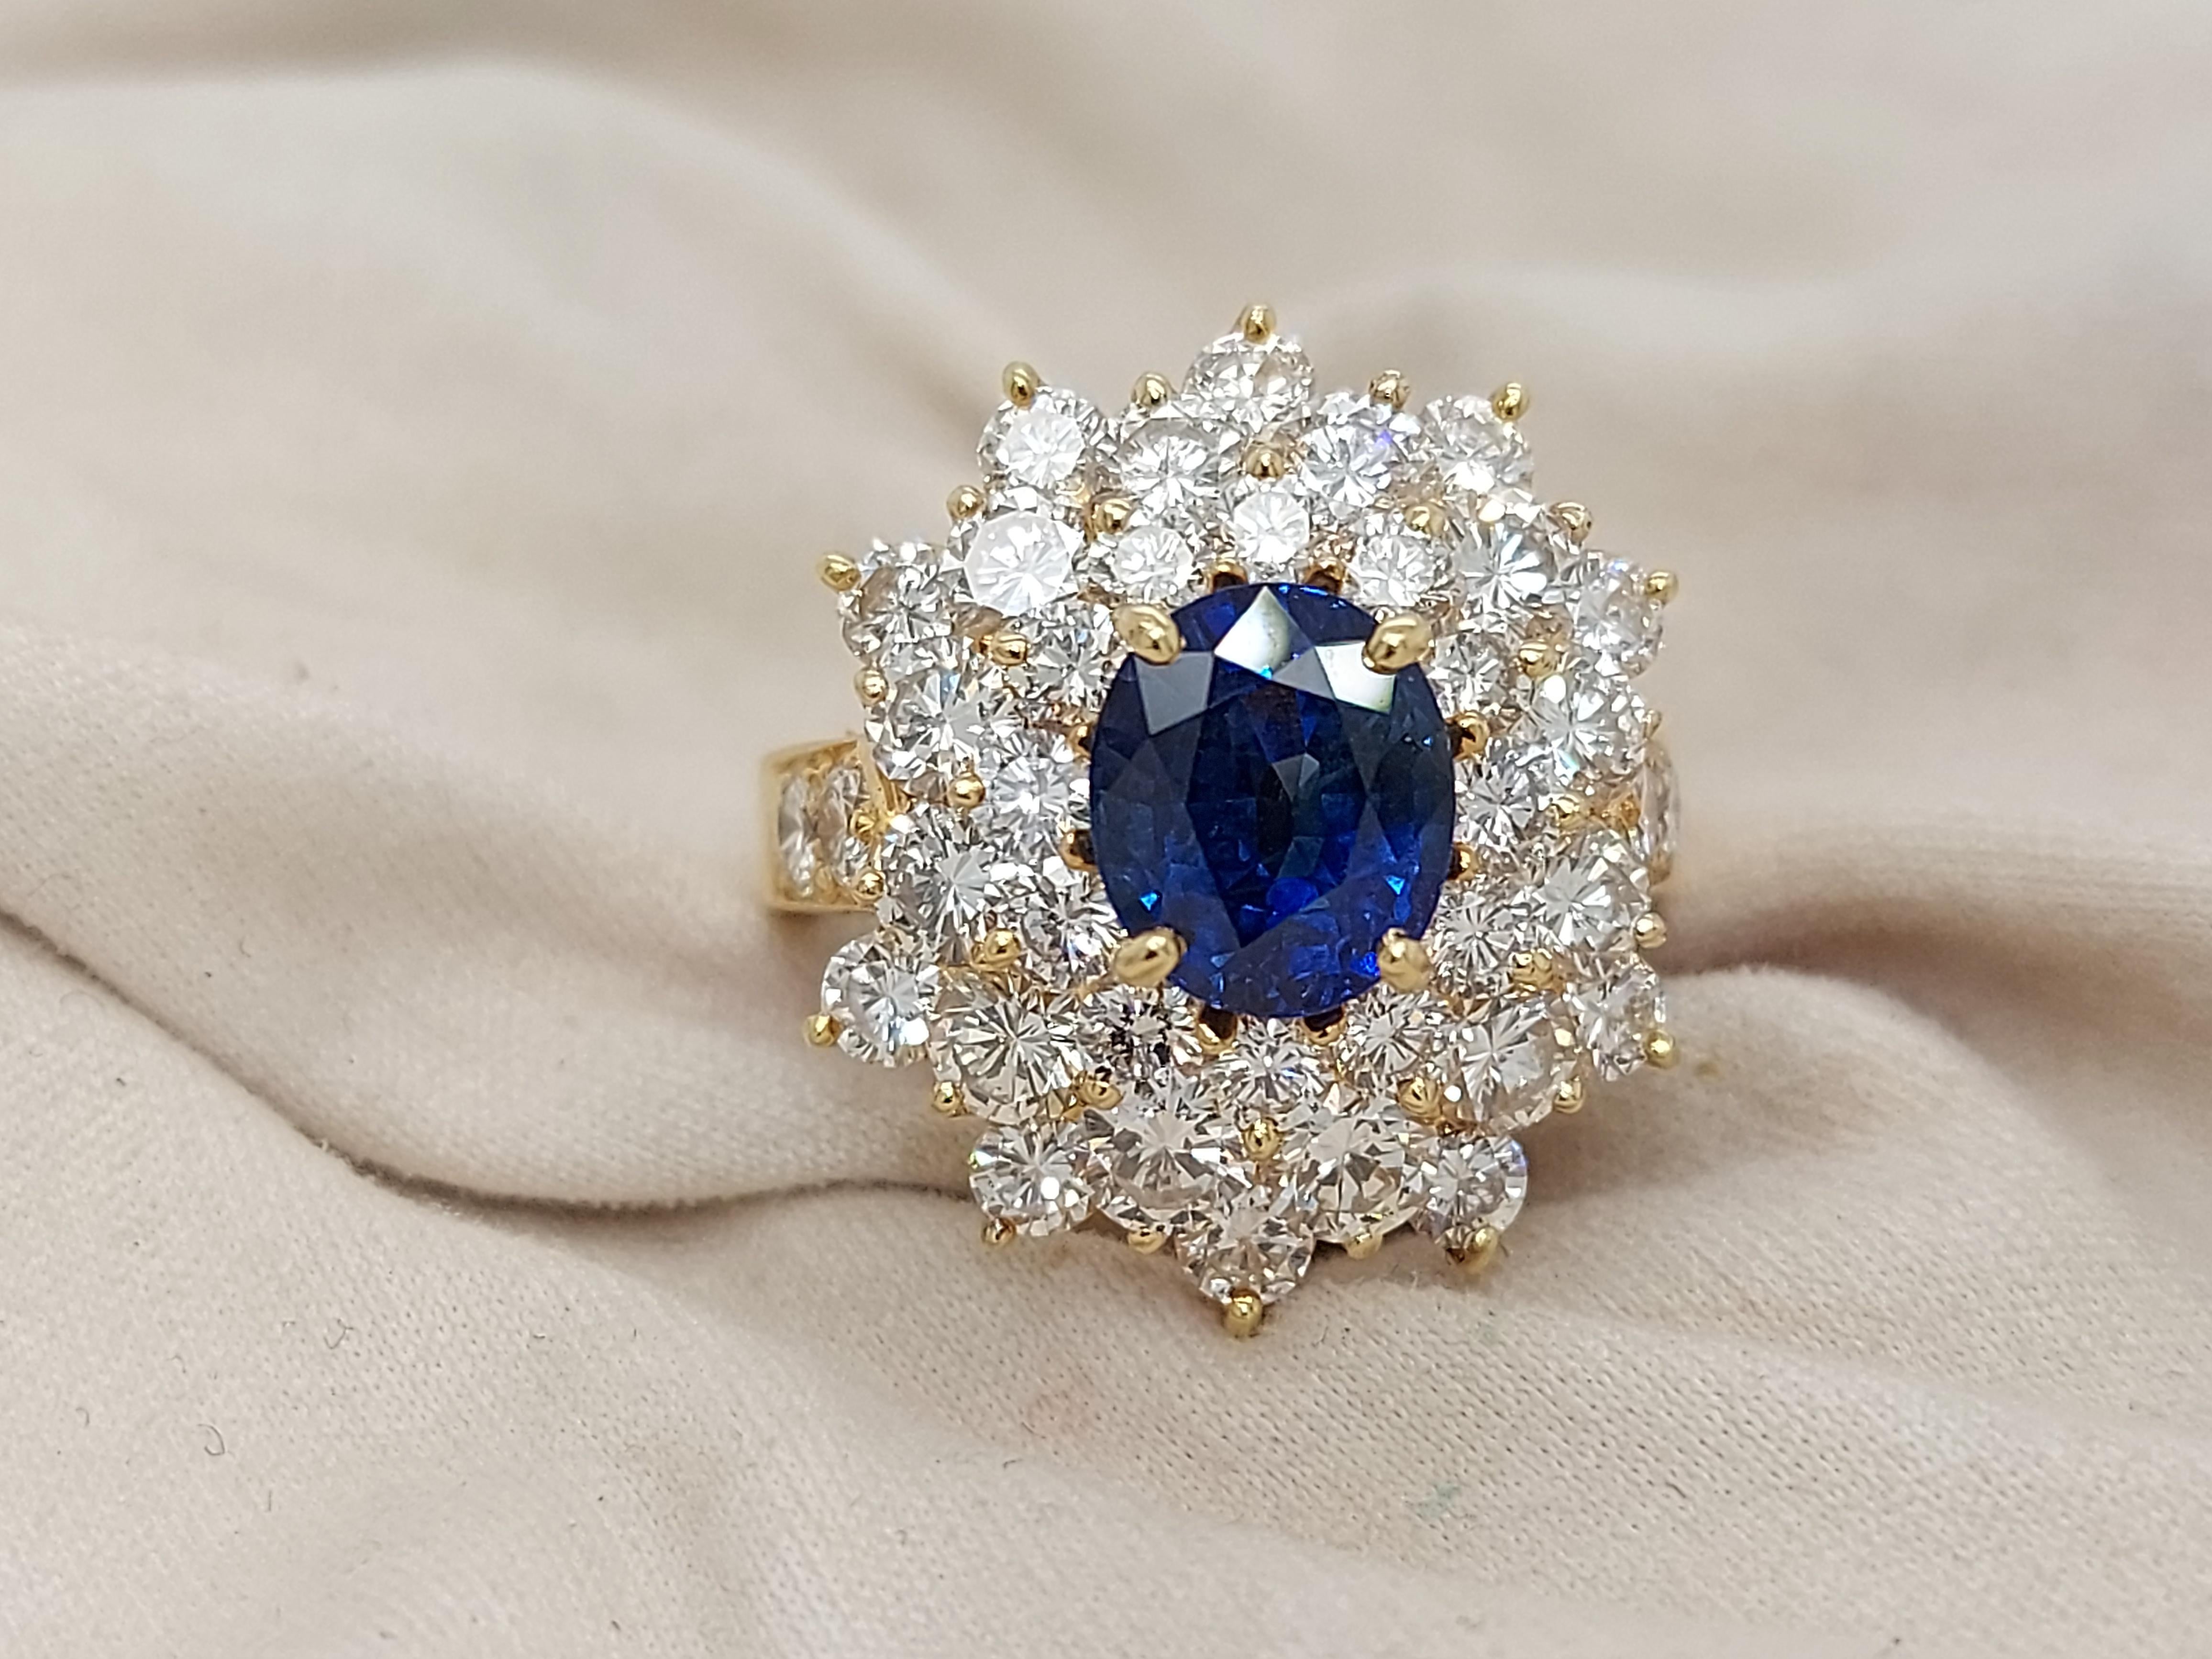 18 kt Yellow Gold Ring with 2ct Sapphire and 2.8ct Diamonds, Estate Sultan Oman For Sale 1